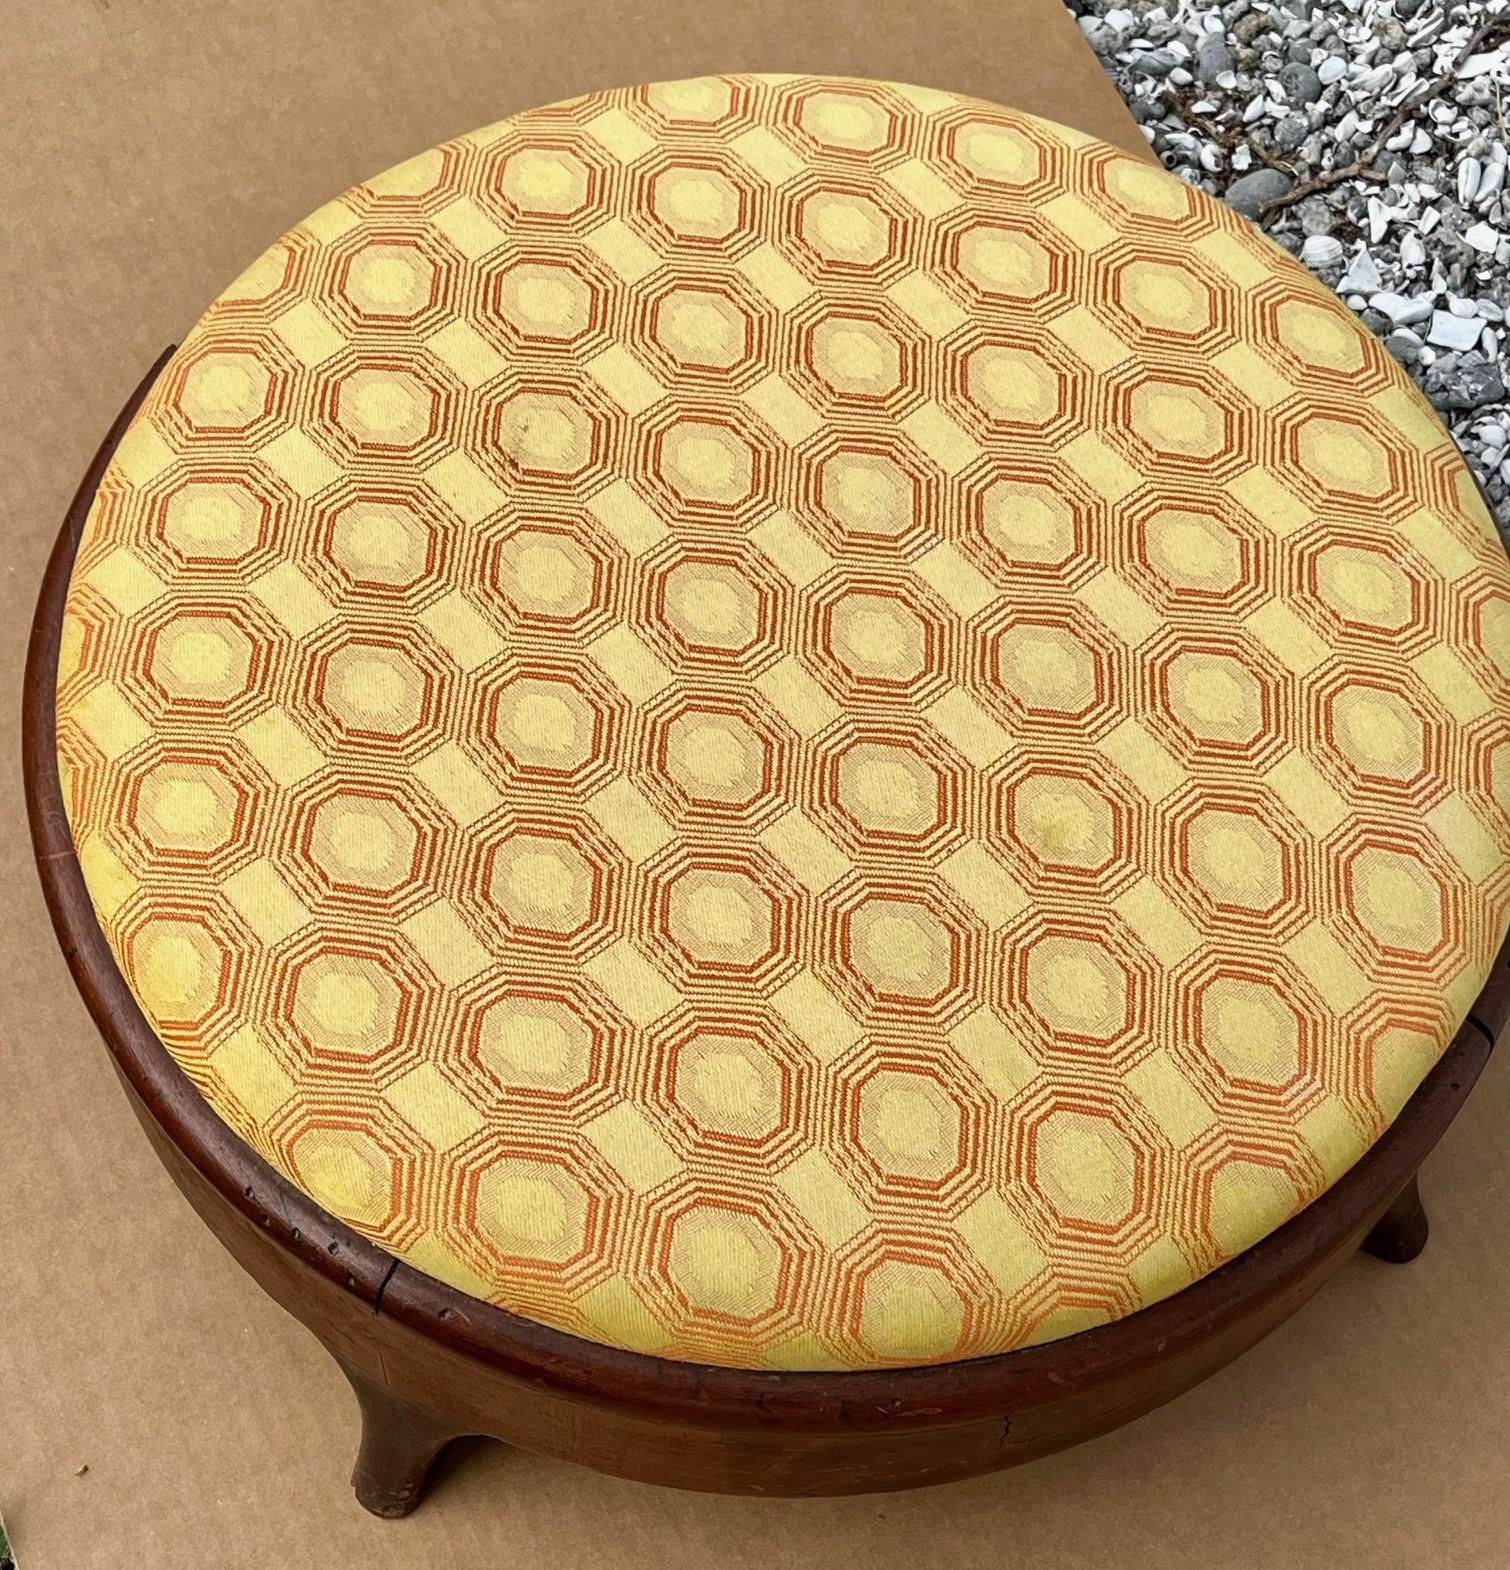 Upholstery 19th Century American Empire Round Upholstered Footstool. For Sale